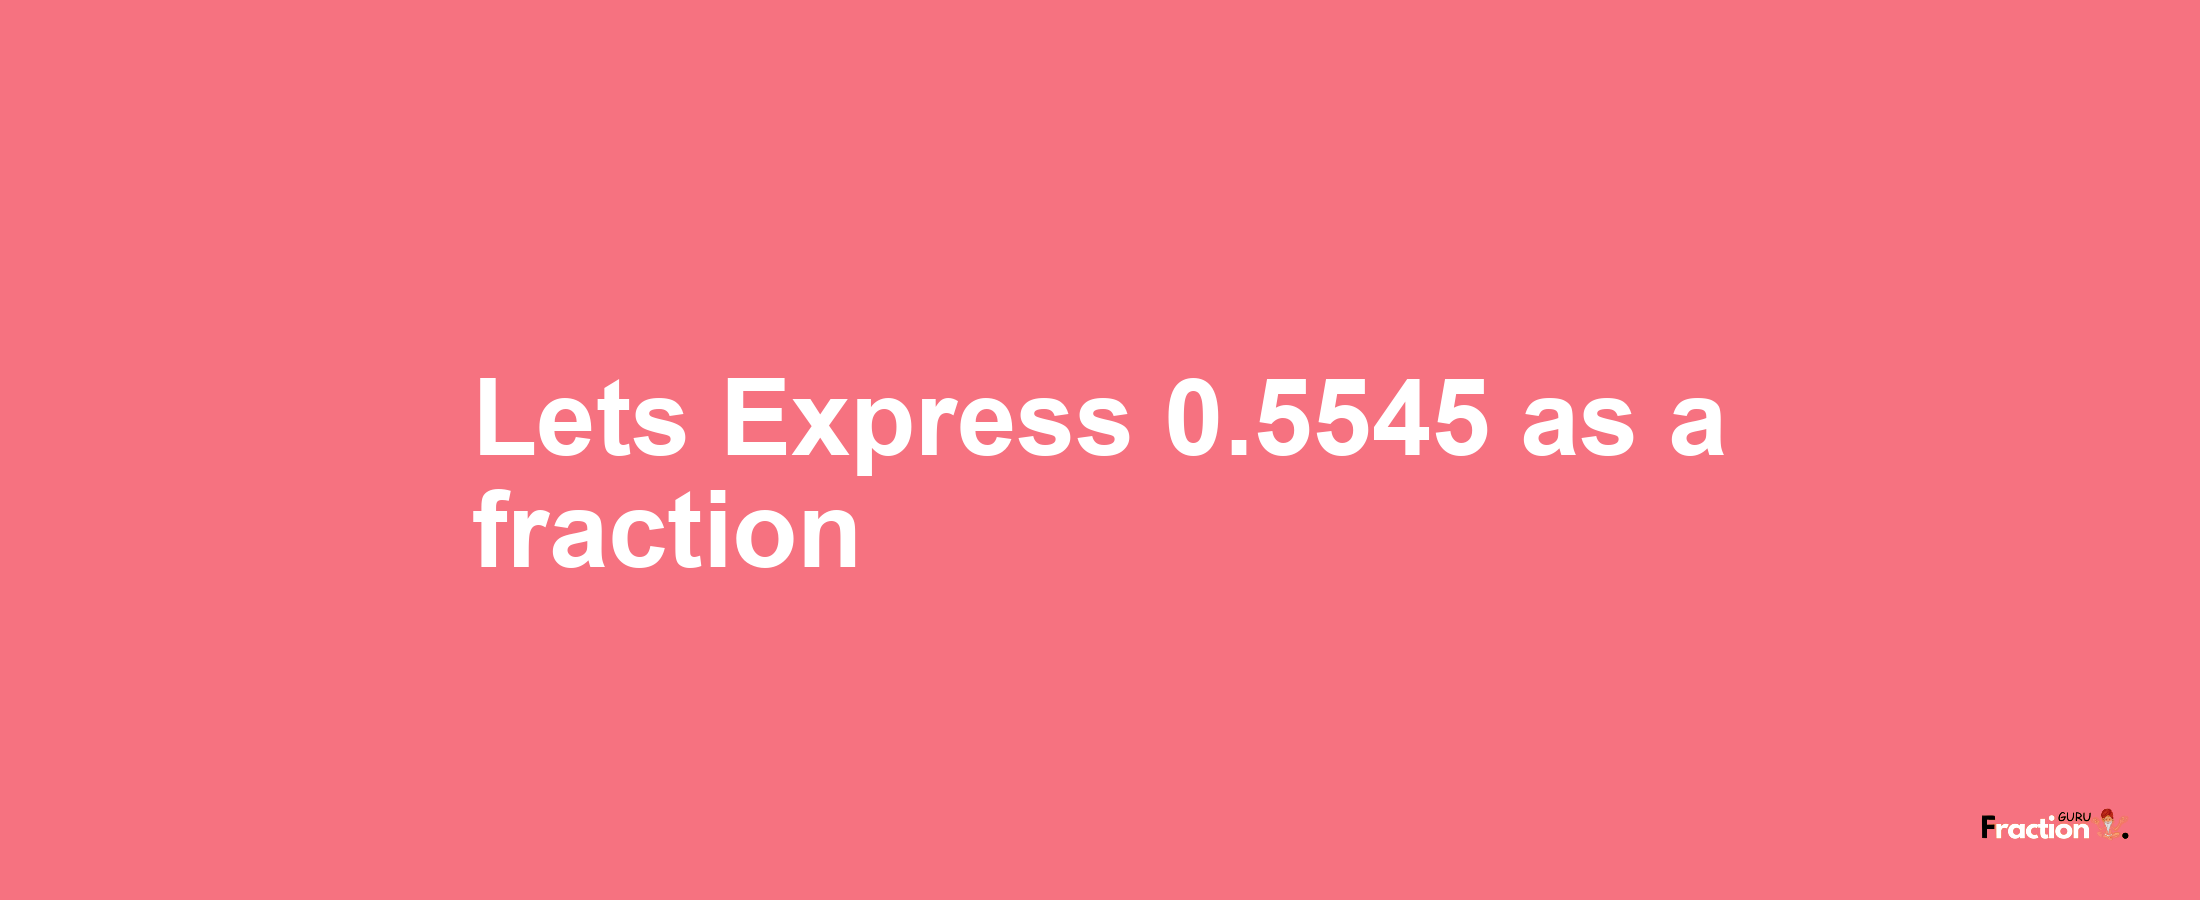 Lets Express 0.5545 as afraction